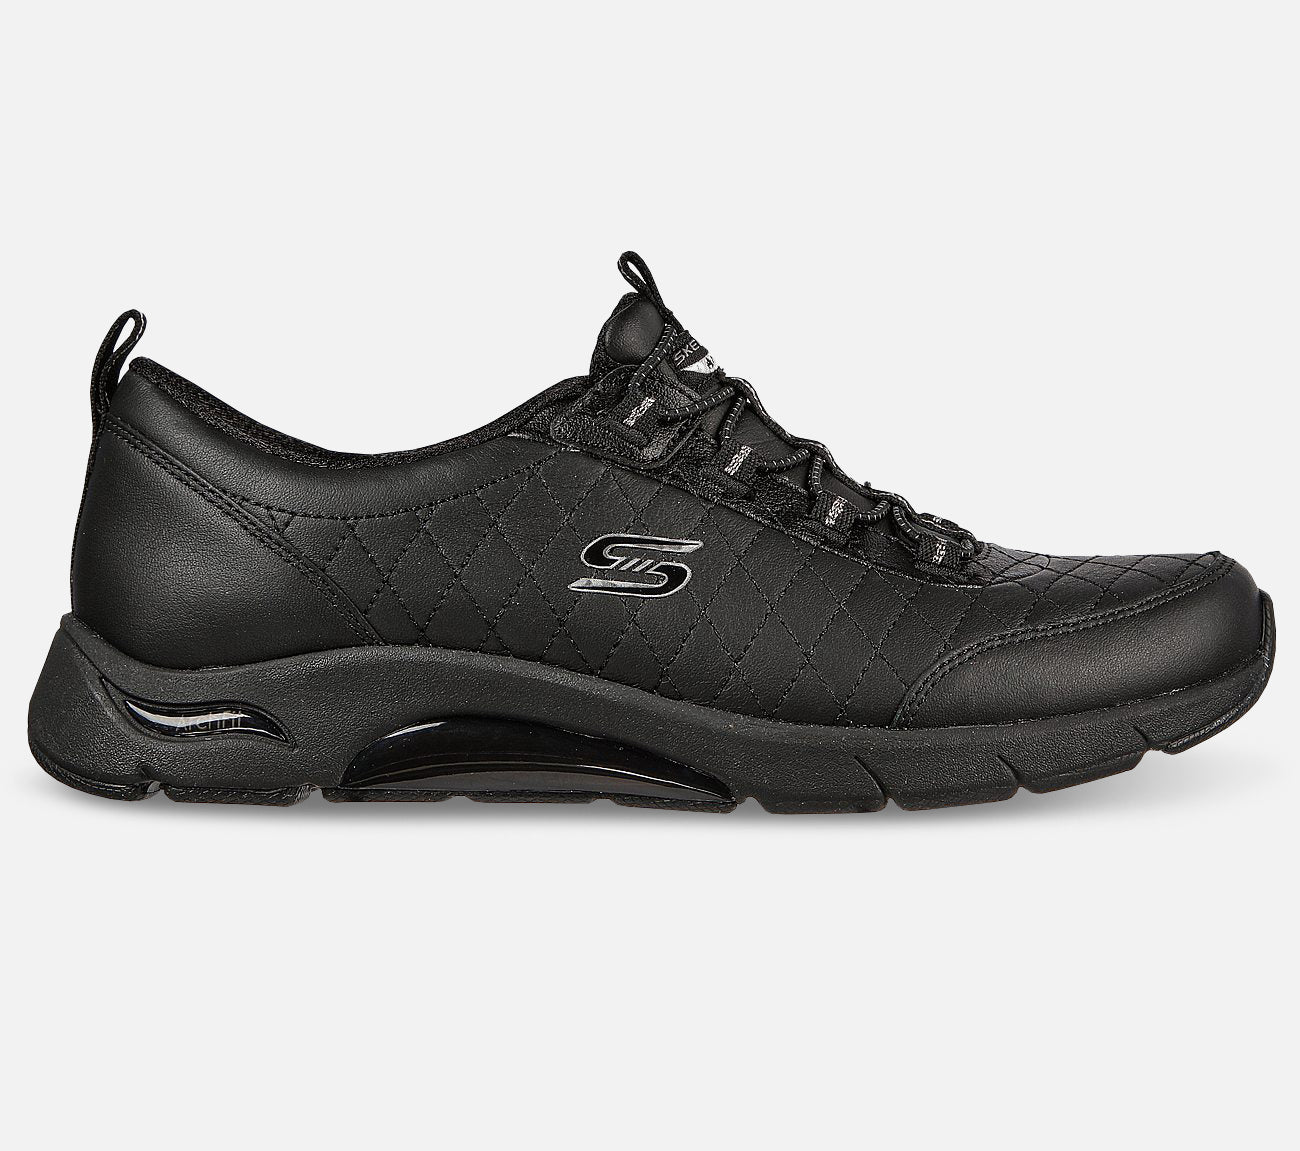 Skech-Air Arch Fit - Royal Luxe Shoe Skechers